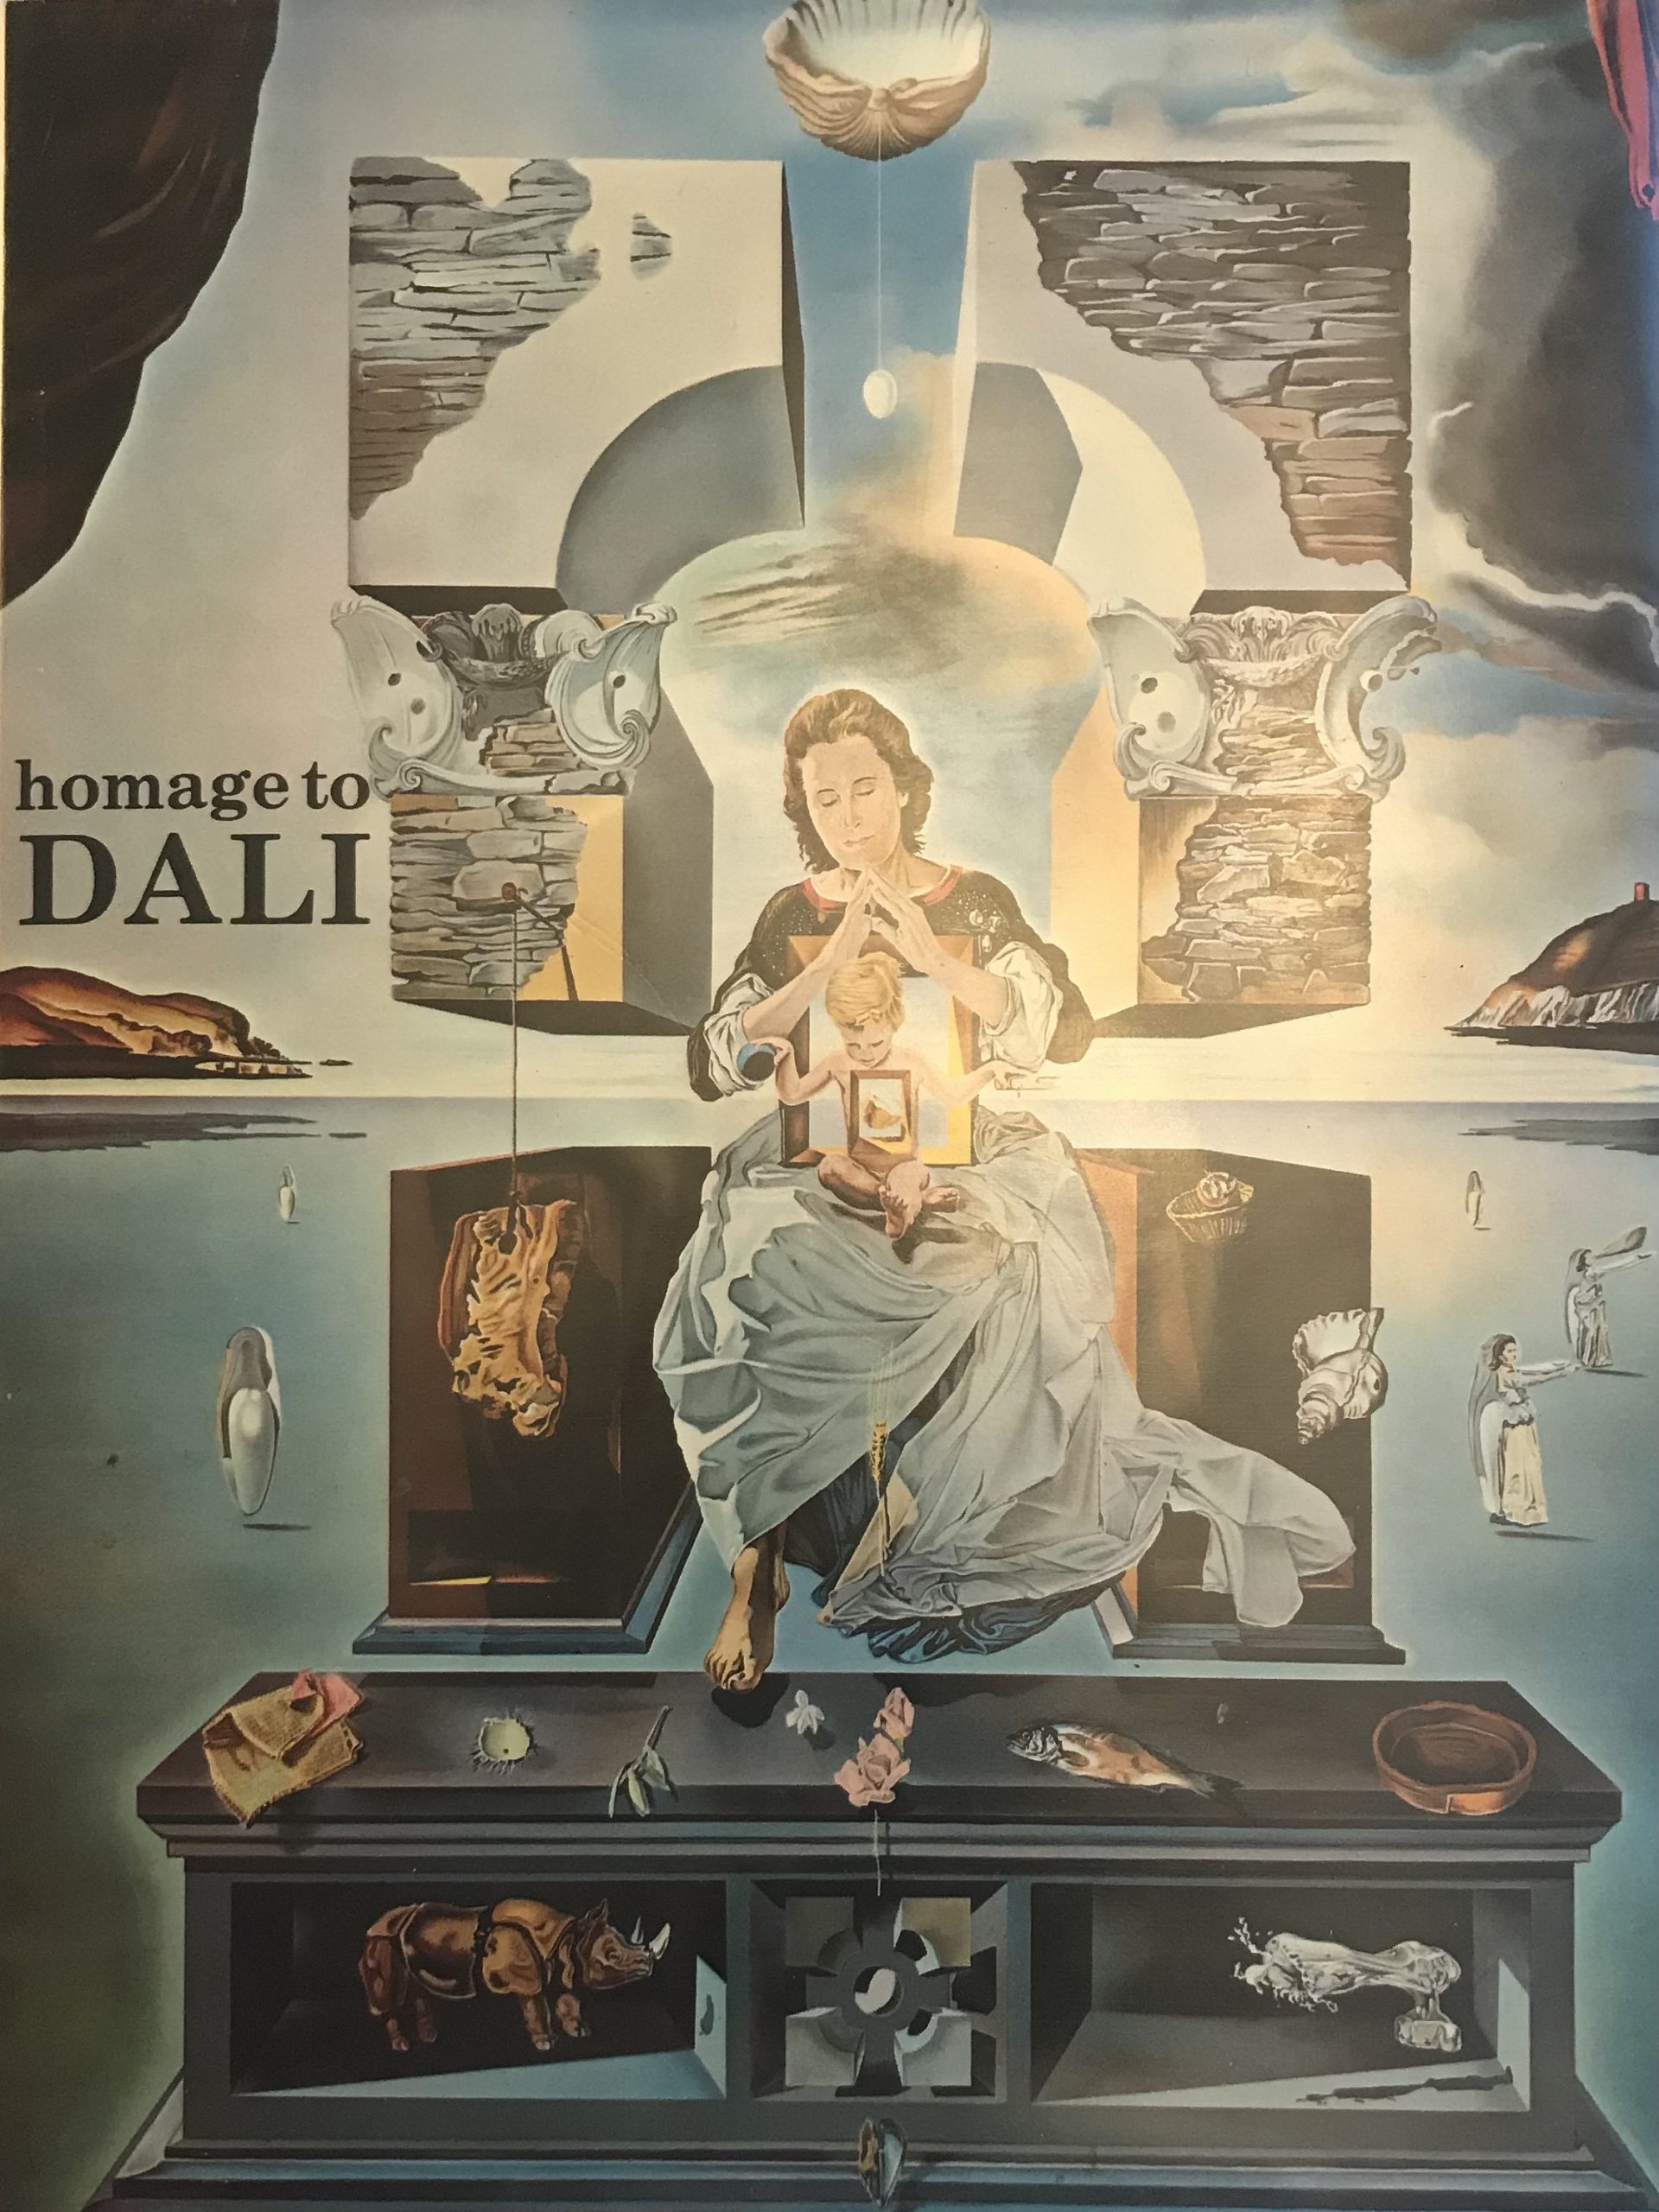 Book Homage to Dali 1980, includes 1 Lithograph